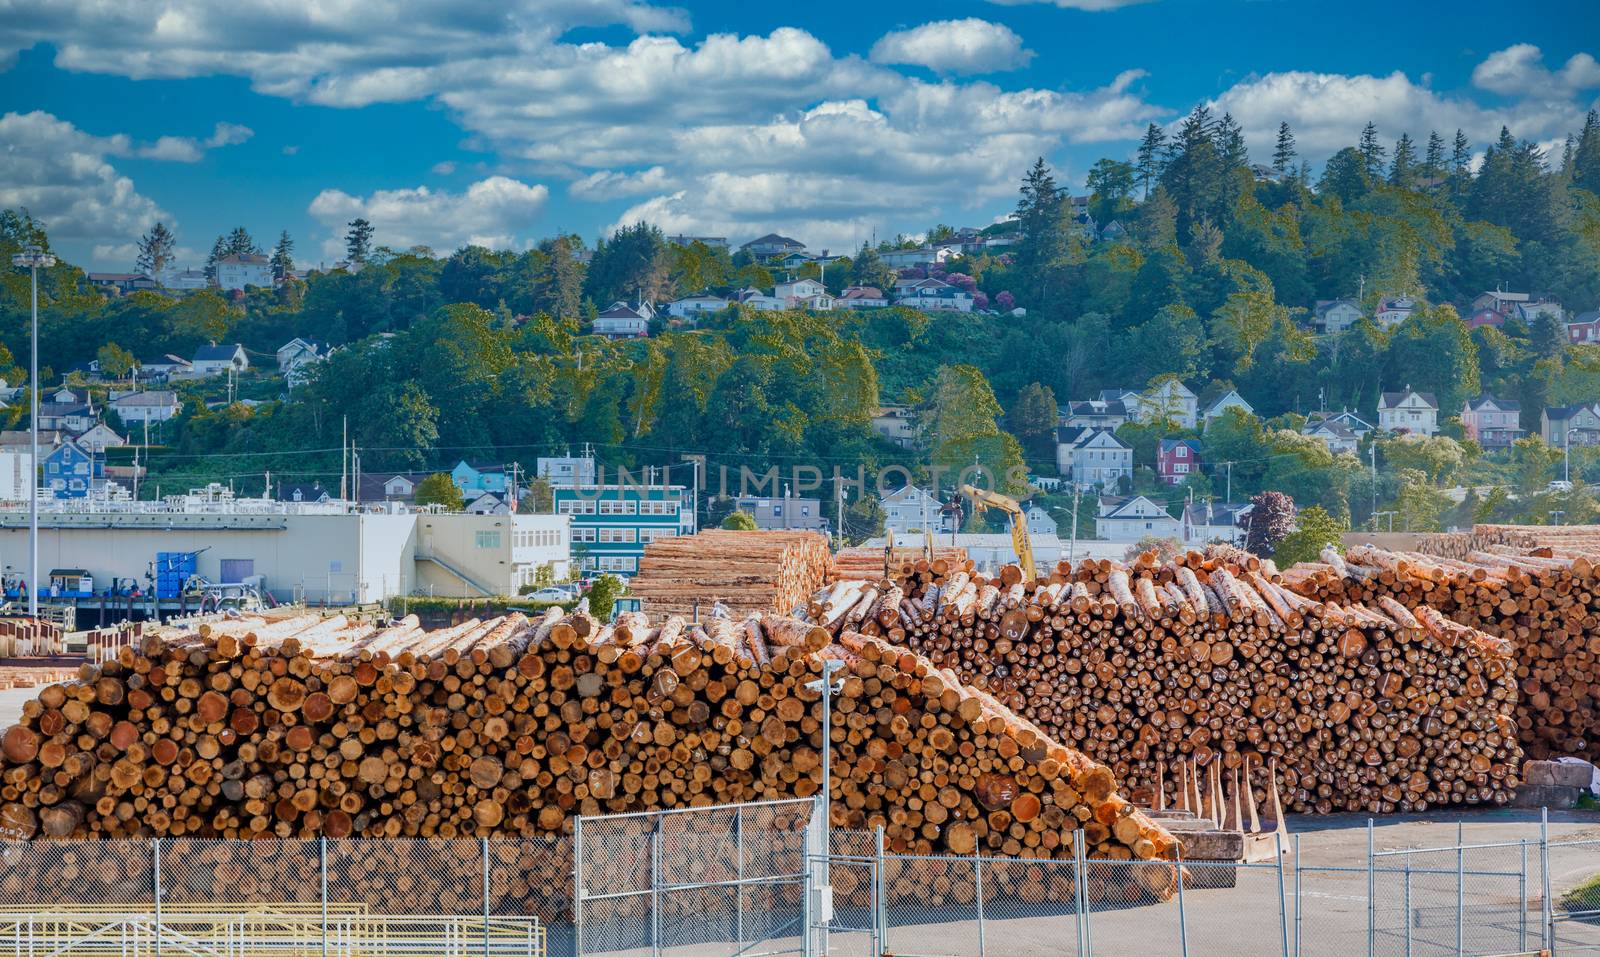 Many trees and logs stacked at a lumber operation on the Oregon coast